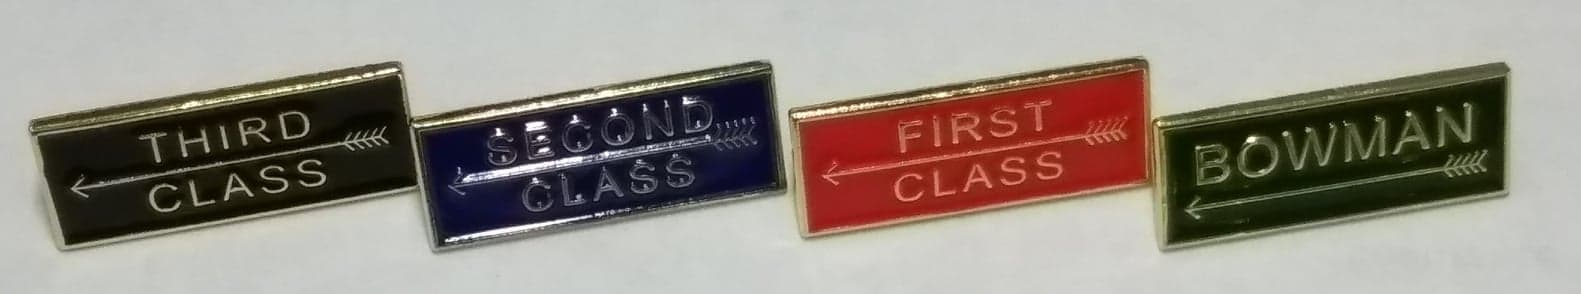 Classification badges from 3rd to Bowman